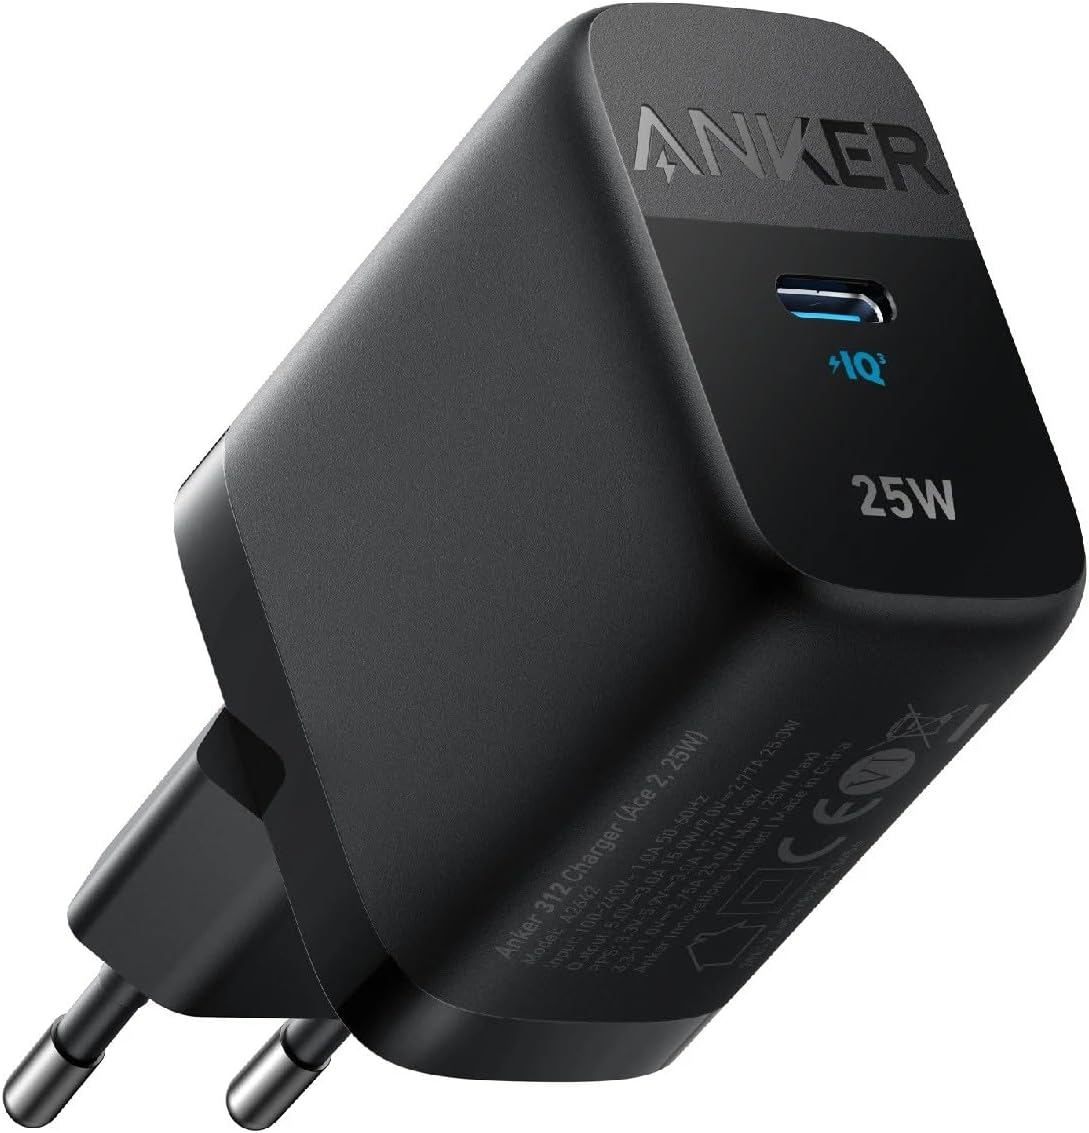 Anker 312 25W Ace Charger 2-Pin with 18 months warranty